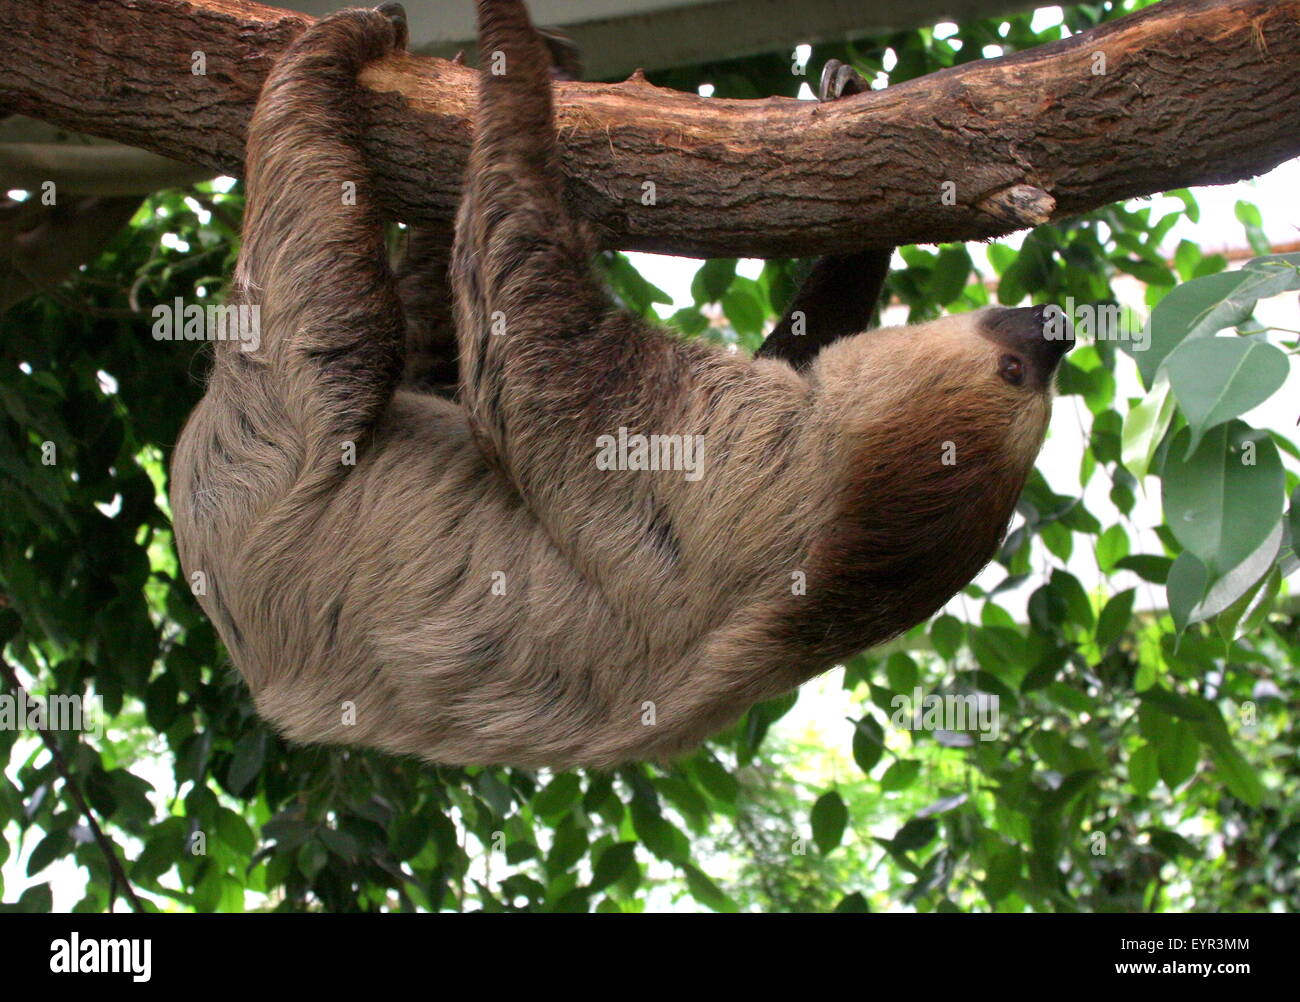 South American Linnaeus's two toed sloth or Southern two-toed sloth (Choloepus didactylus) Stock Photo